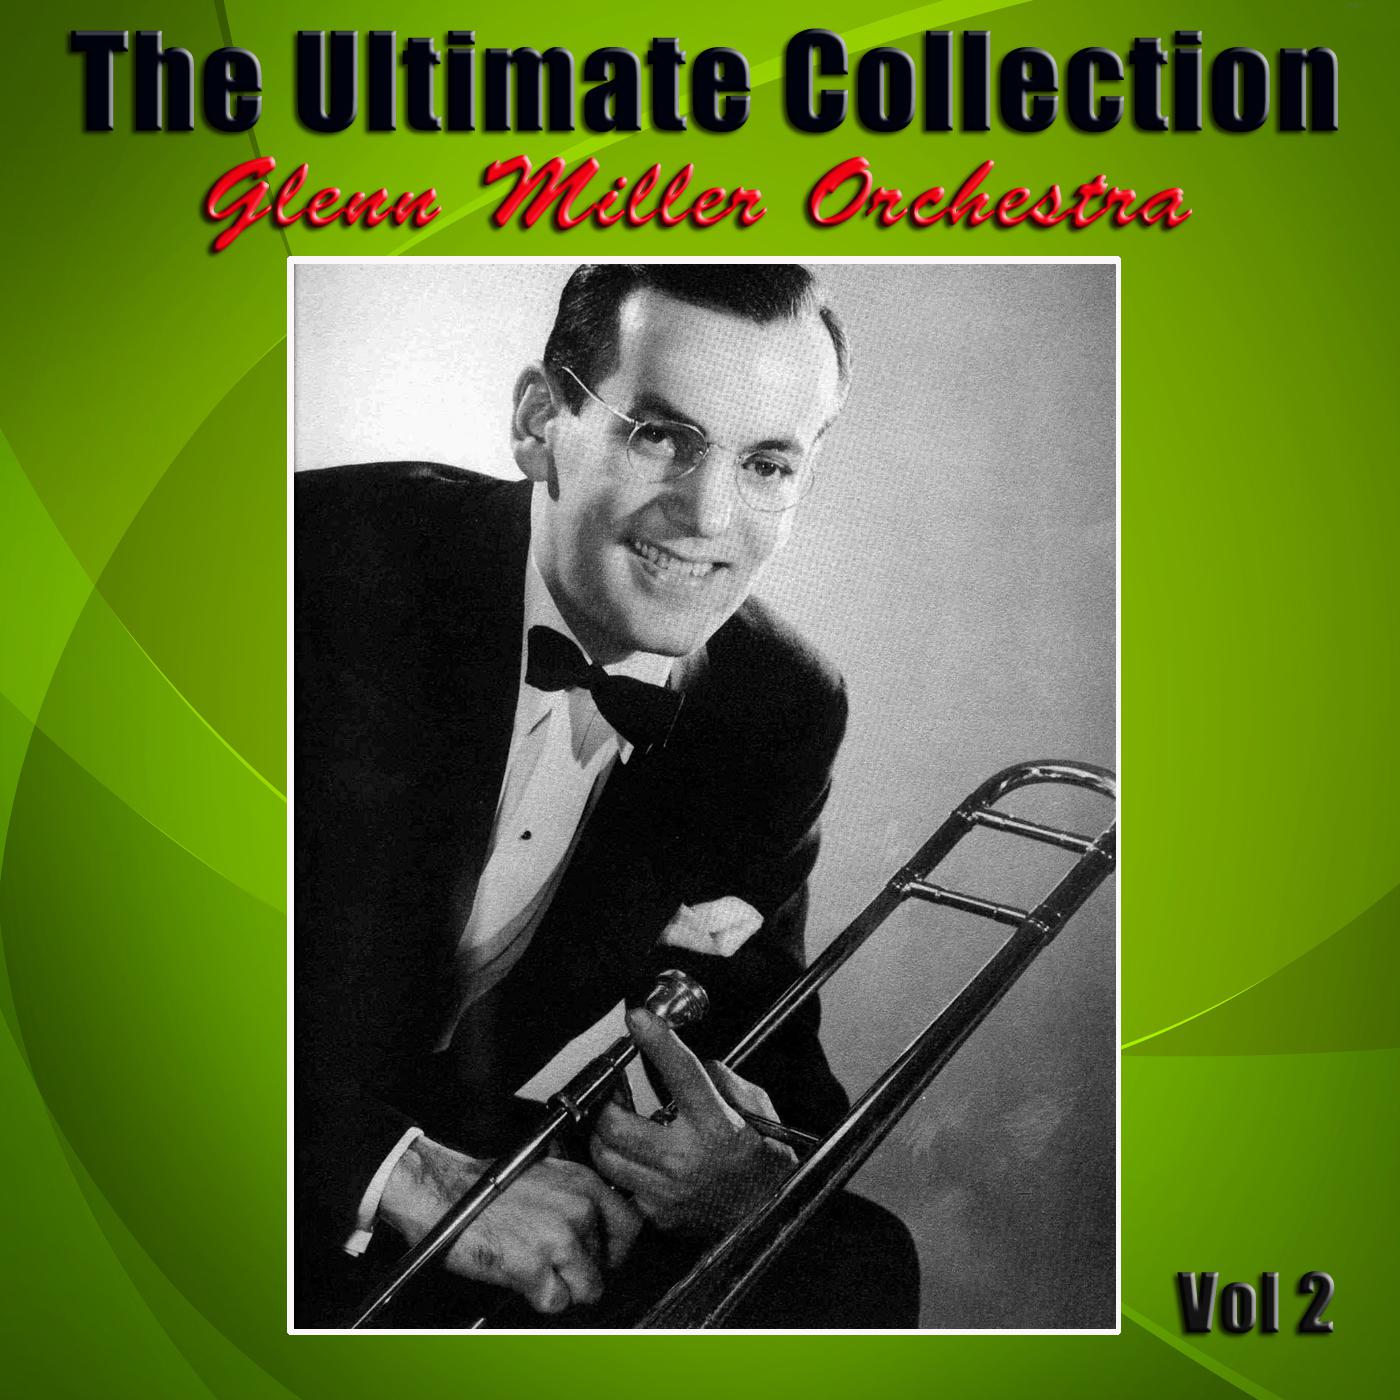 The Ultimate Collection, Vol. 2